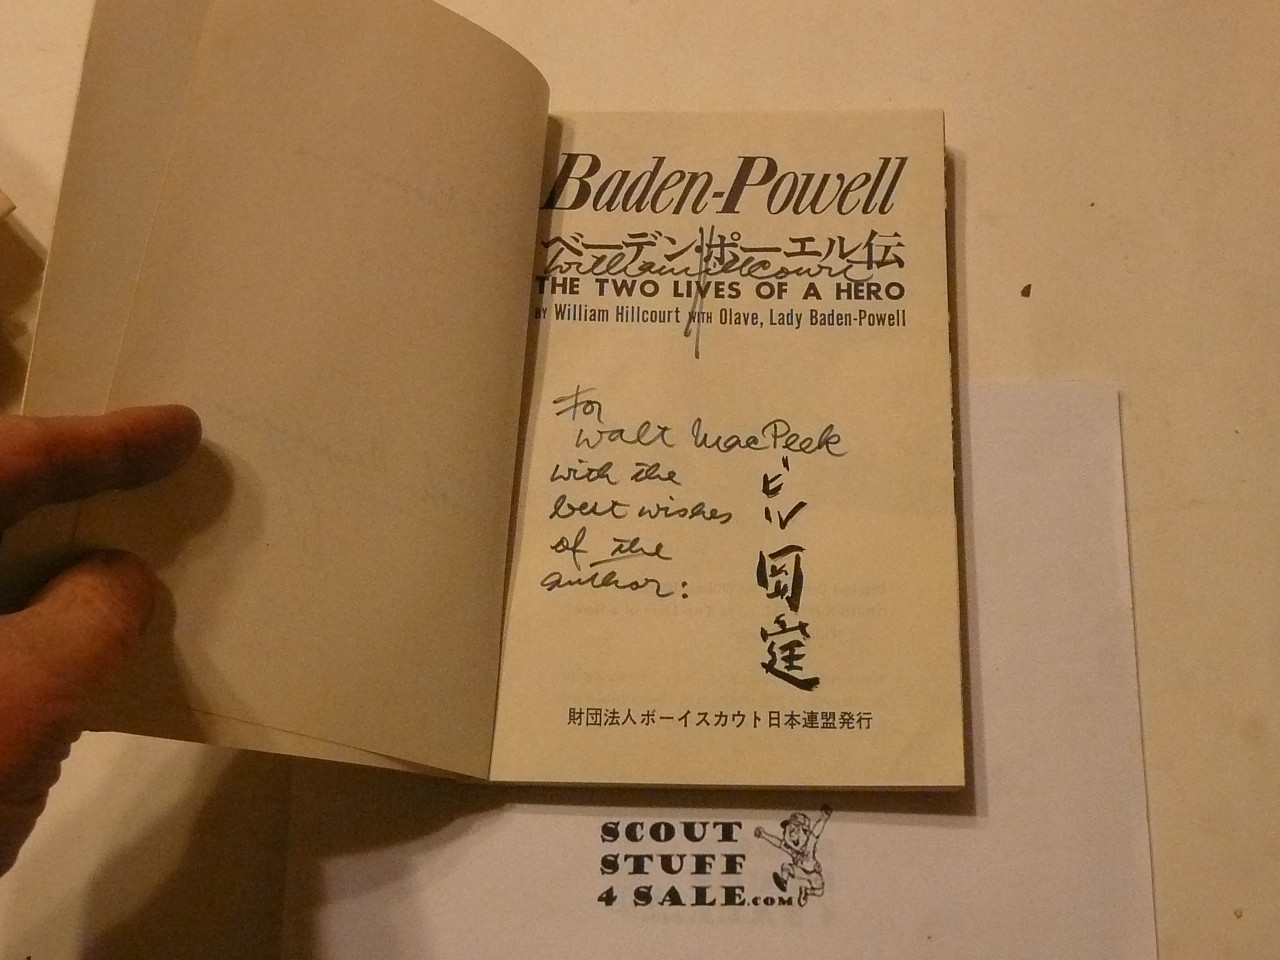 Baden Powell The Two Lives of a Hero, By William Hillcourt, Presented to Walter Macpeek and signed by Hillcourt, CHINESE version